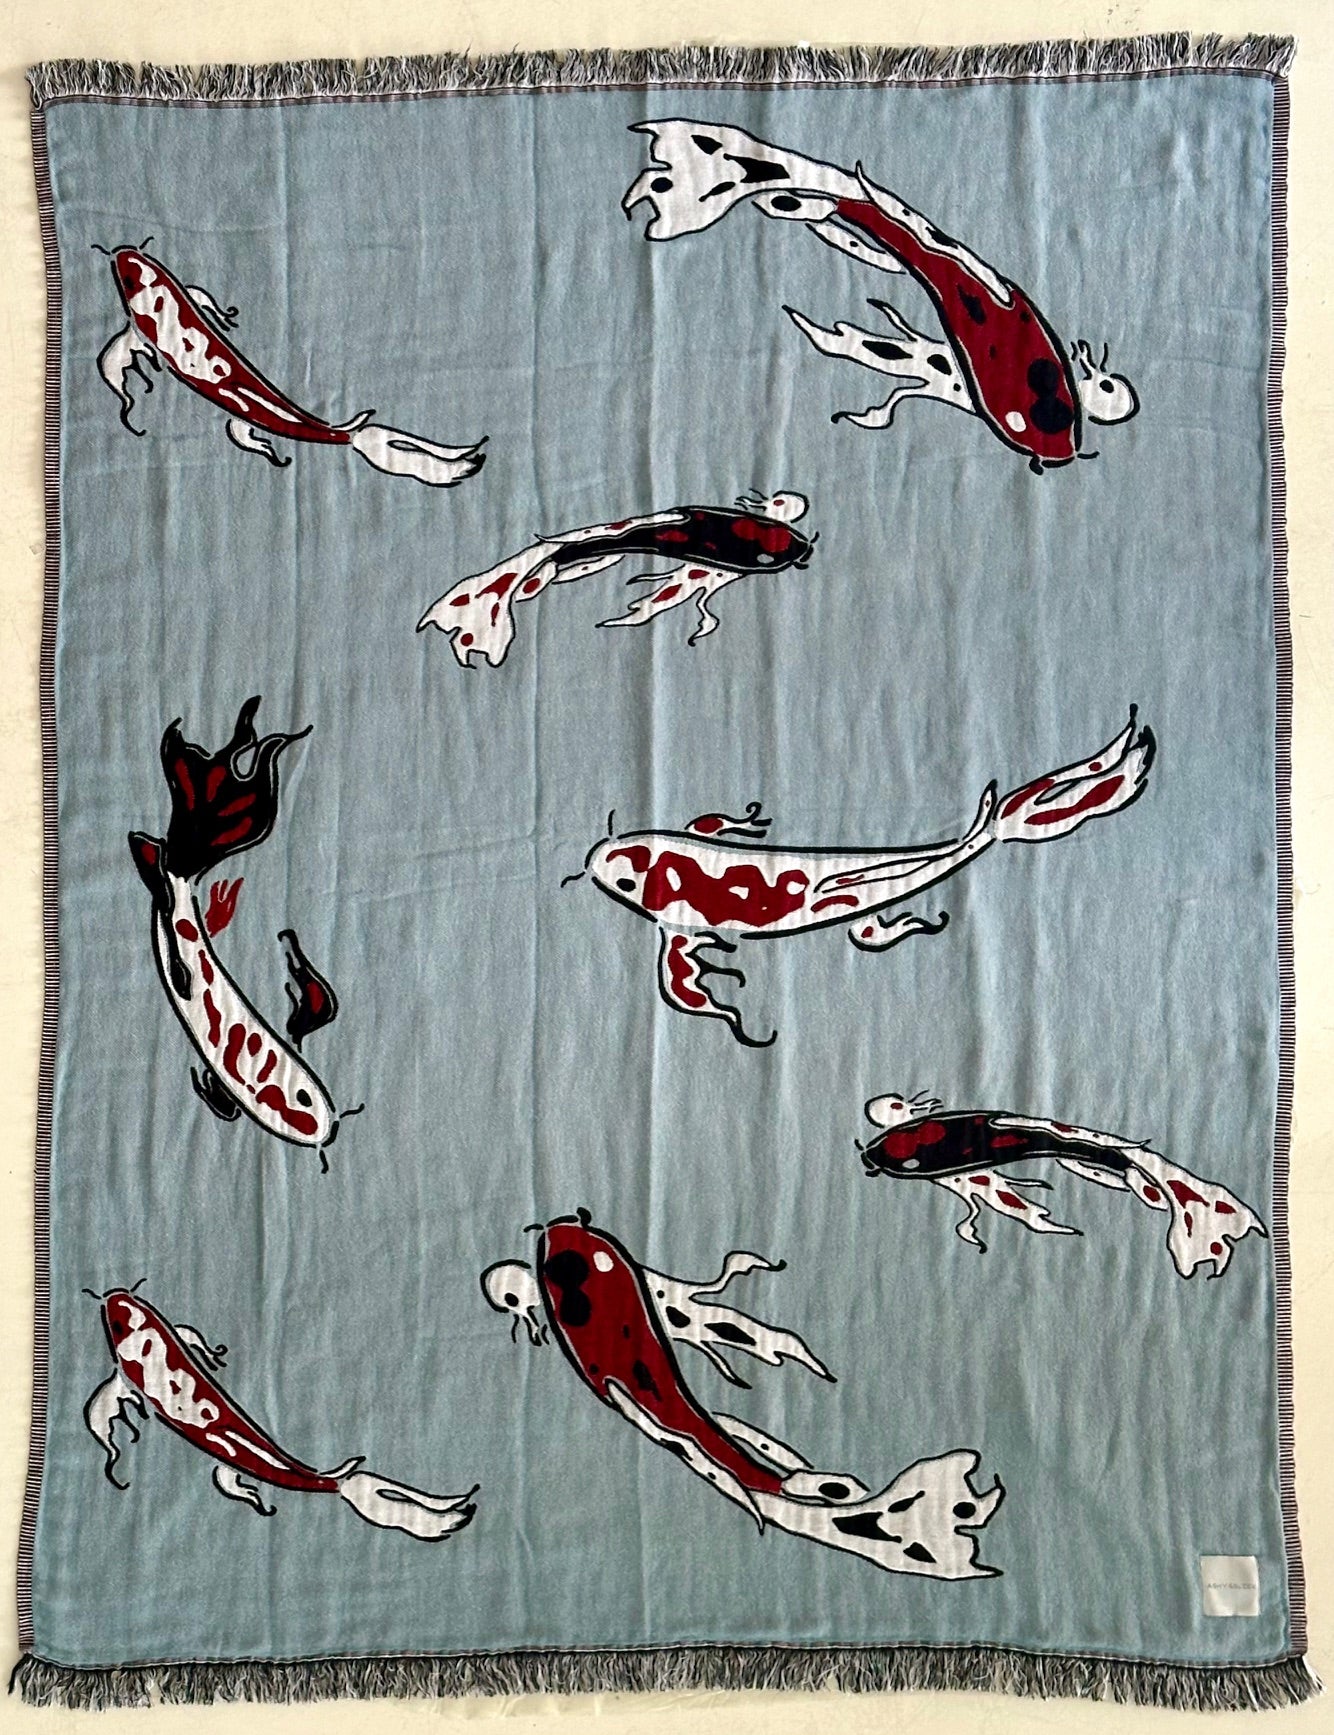 Koi Fish Couch Throw - 100% cotton, jacquard couch throw with koi fish pattern tones, different on each side